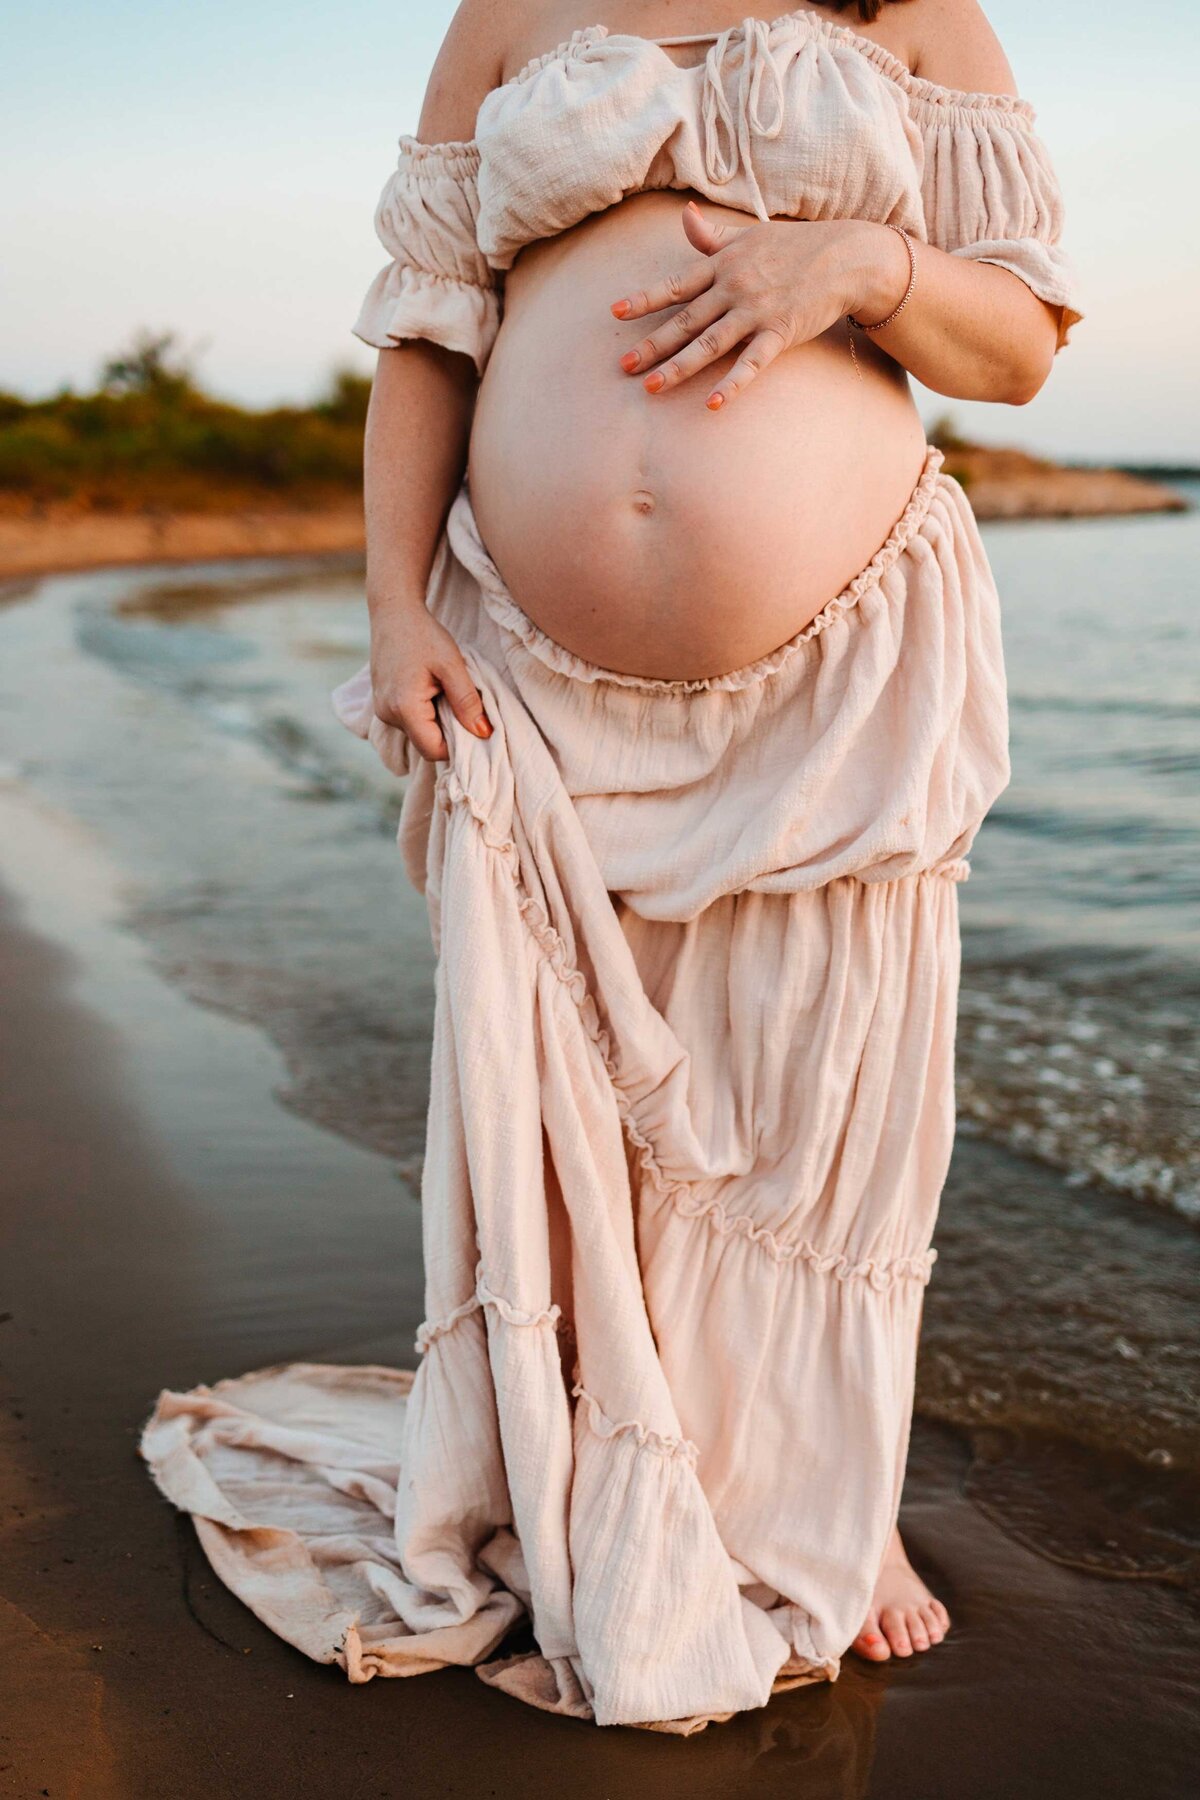 The professional photographer in Albuquerque captures a stunning maternity scene with the future mom in a light pink outfit, standing gracefully in front of the sea.